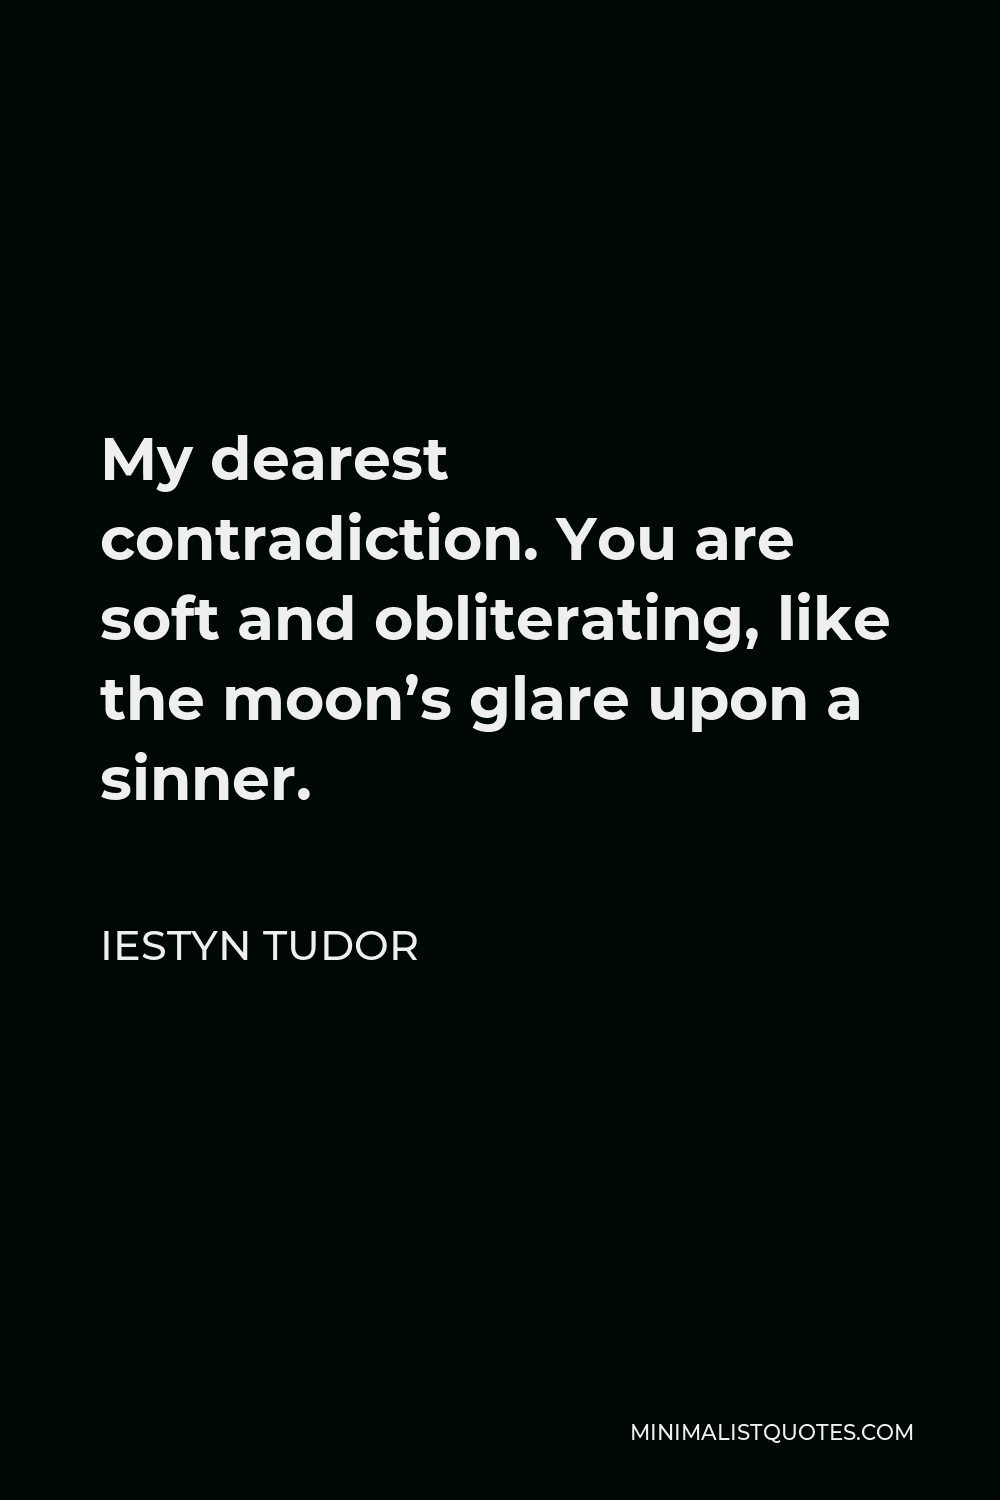 Iestyn Tudor Quote - My dearest contradiction. You are soft and obliterating, like the moon’s glare upon a sinner.